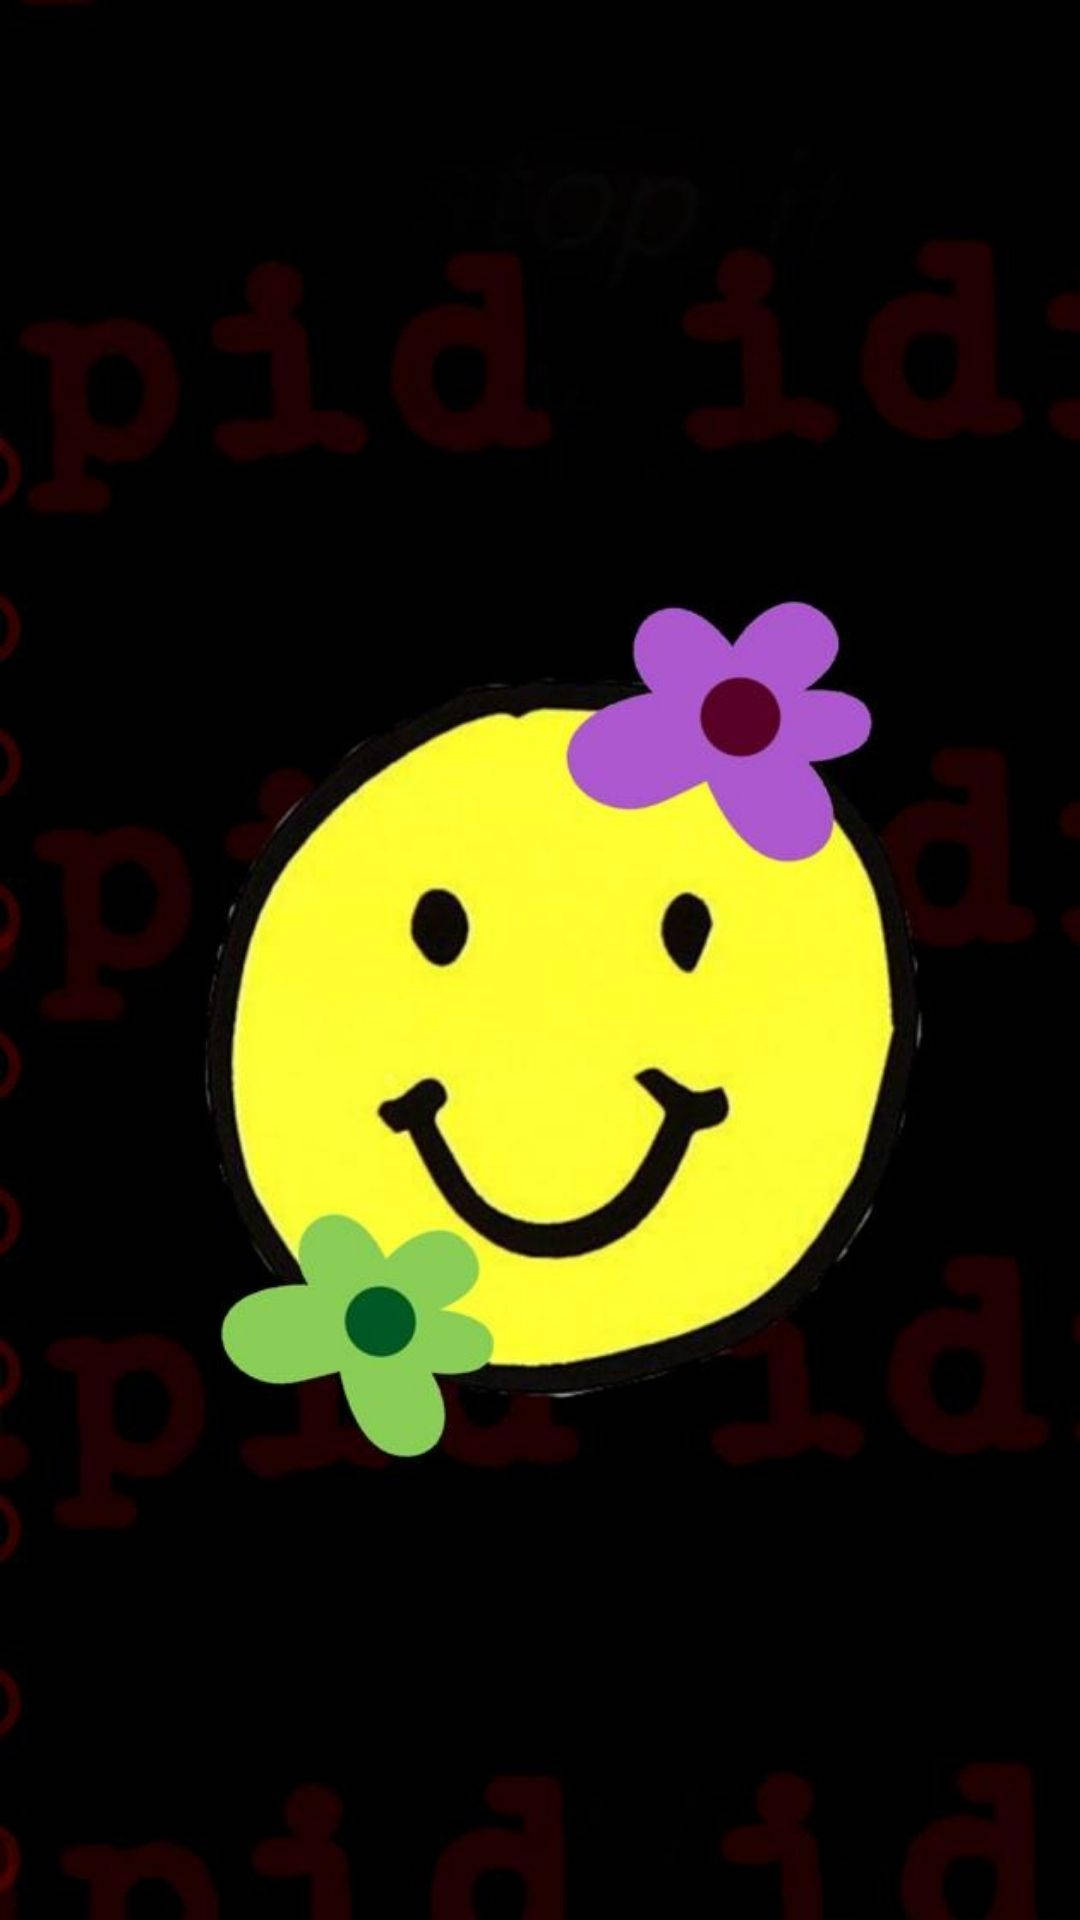 Dreamcore Emoticon With Flowers Background